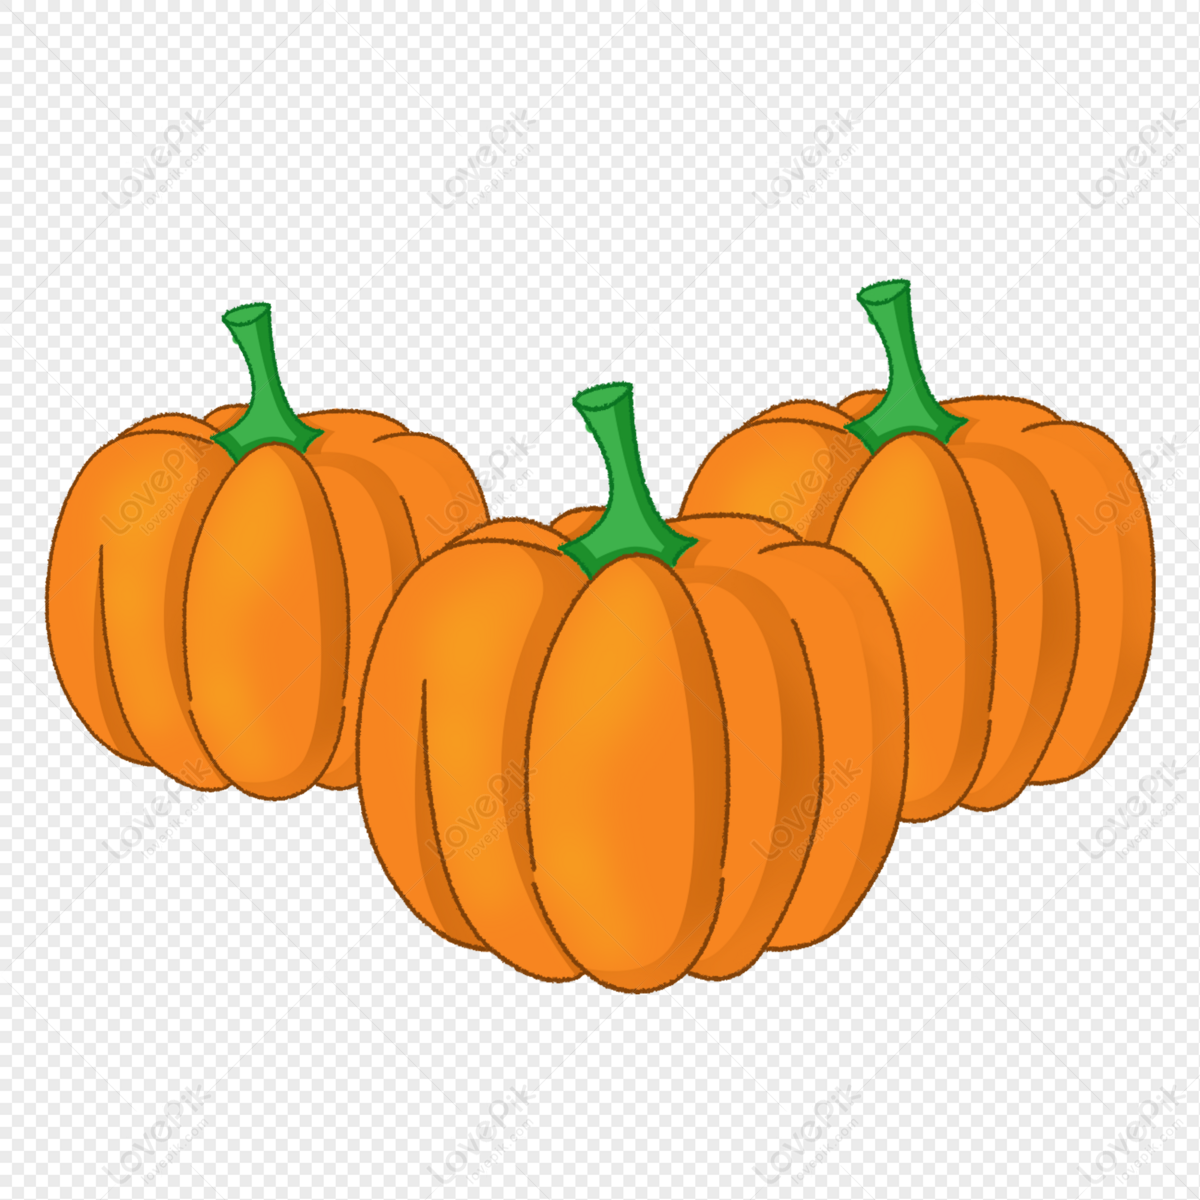 Hand Drawn Cartoon Colorful Pumpkins Autumn Vegetables PNG Image Free  Download And Clipart Image For Free Download - Lovepik | 401514921